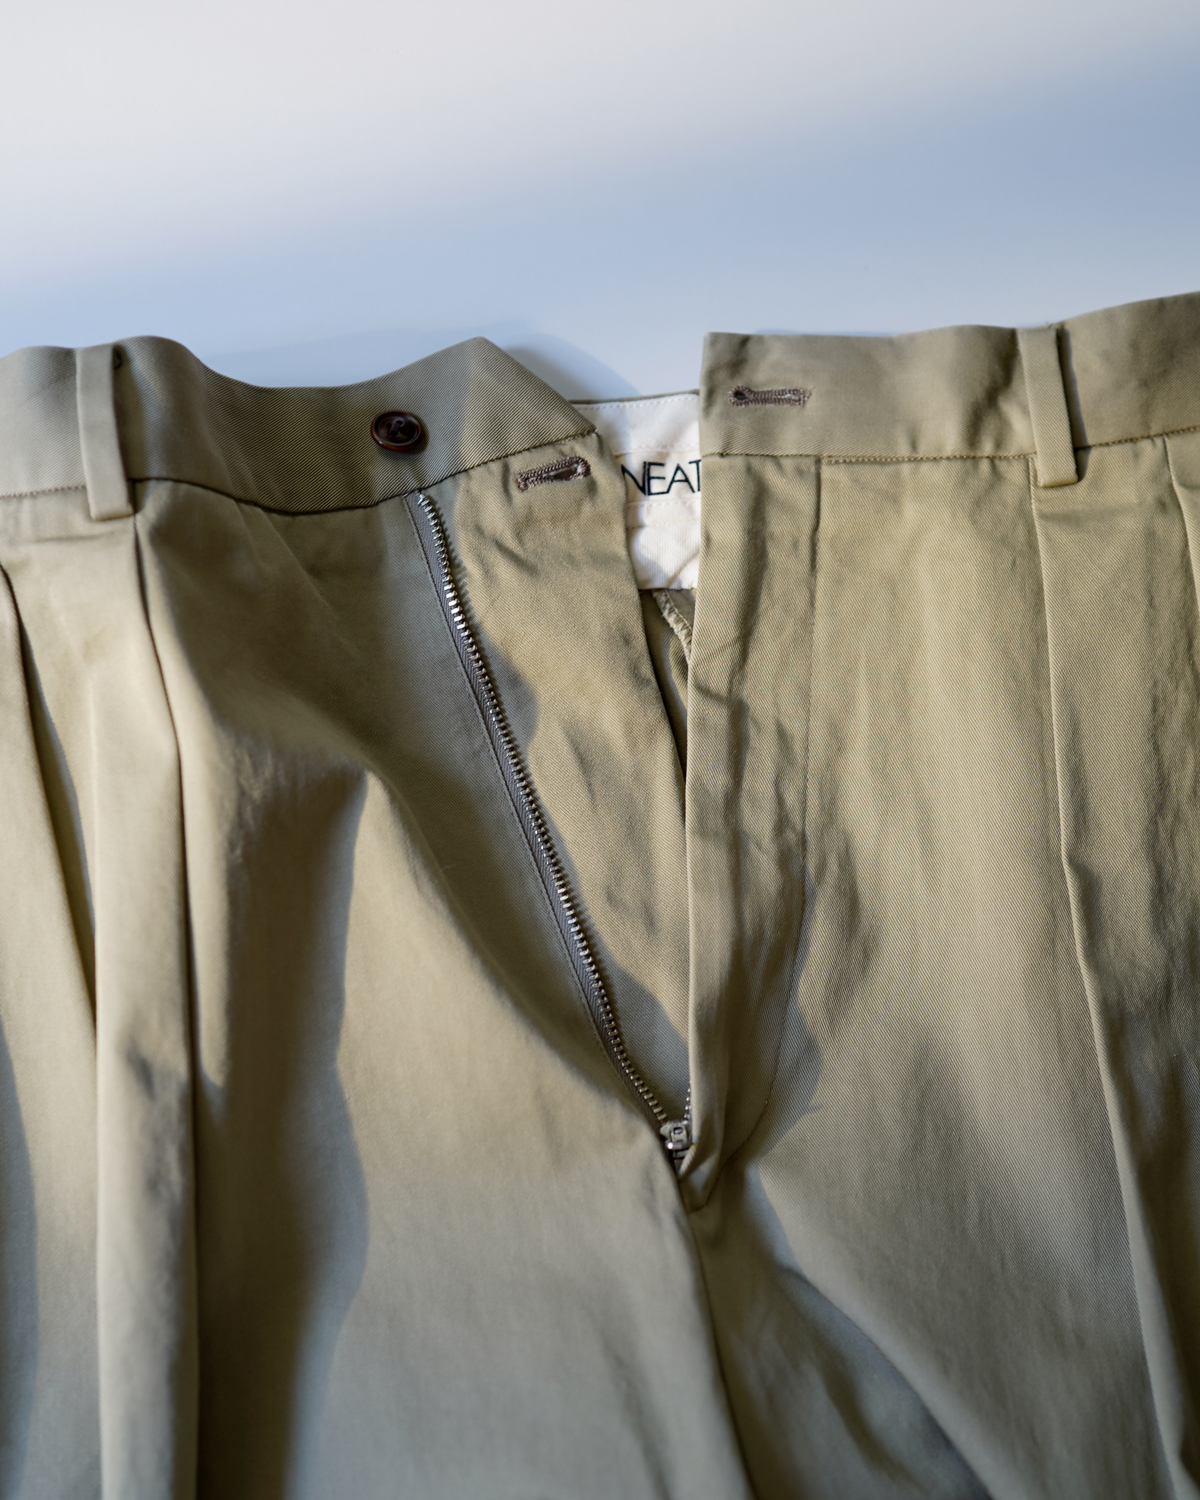 NEAT｜NEAT Chino - Beige｜PRODUCT｜Continuer Inc.｜メガネ 